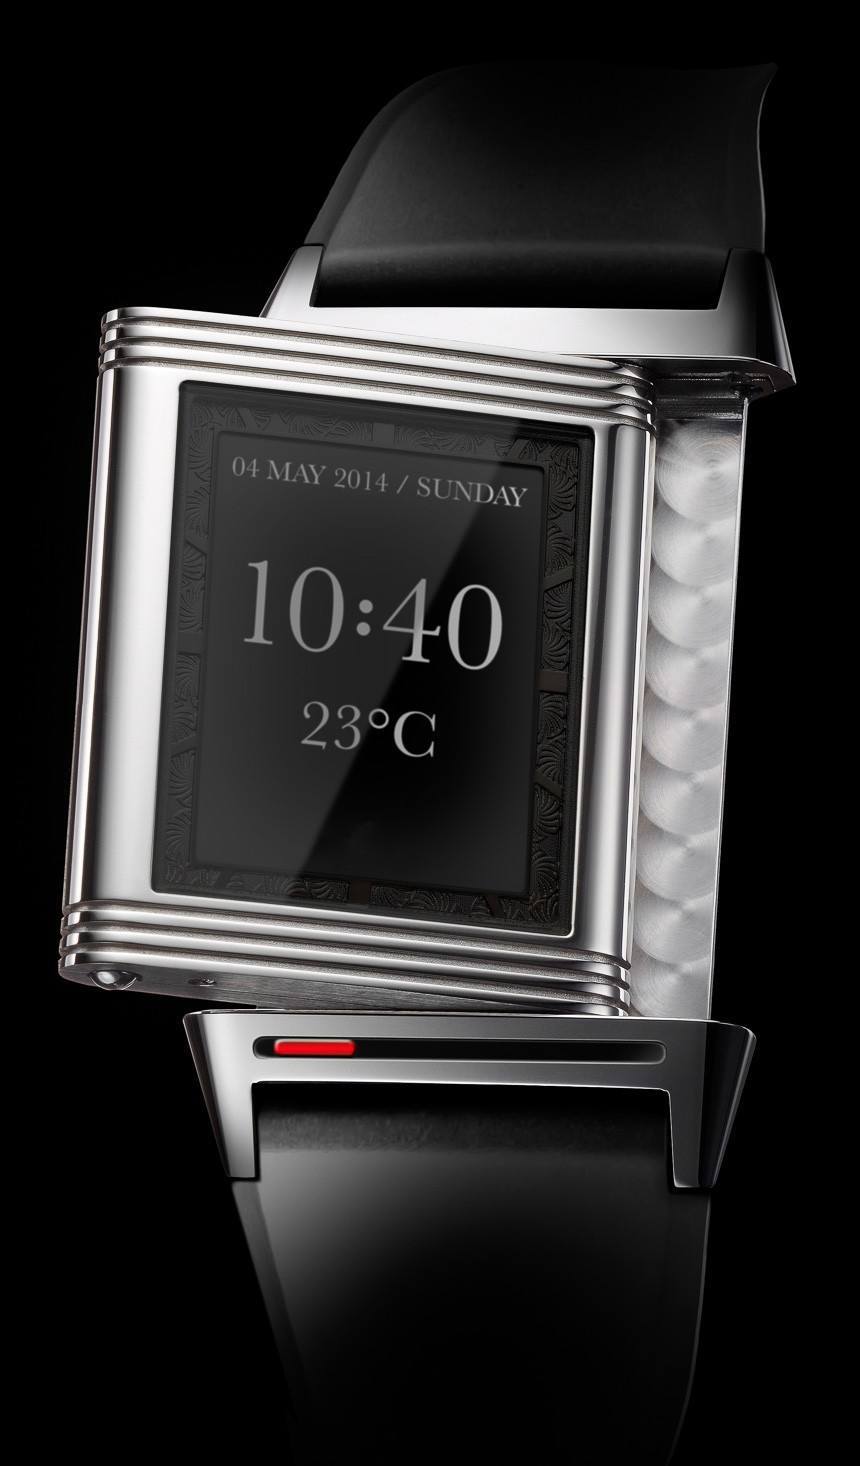 hoed Lunch Discreet 3 Concept Smartwatches That Could Be From Popular Swiss Luxury Brands |  aBlogtoWatch